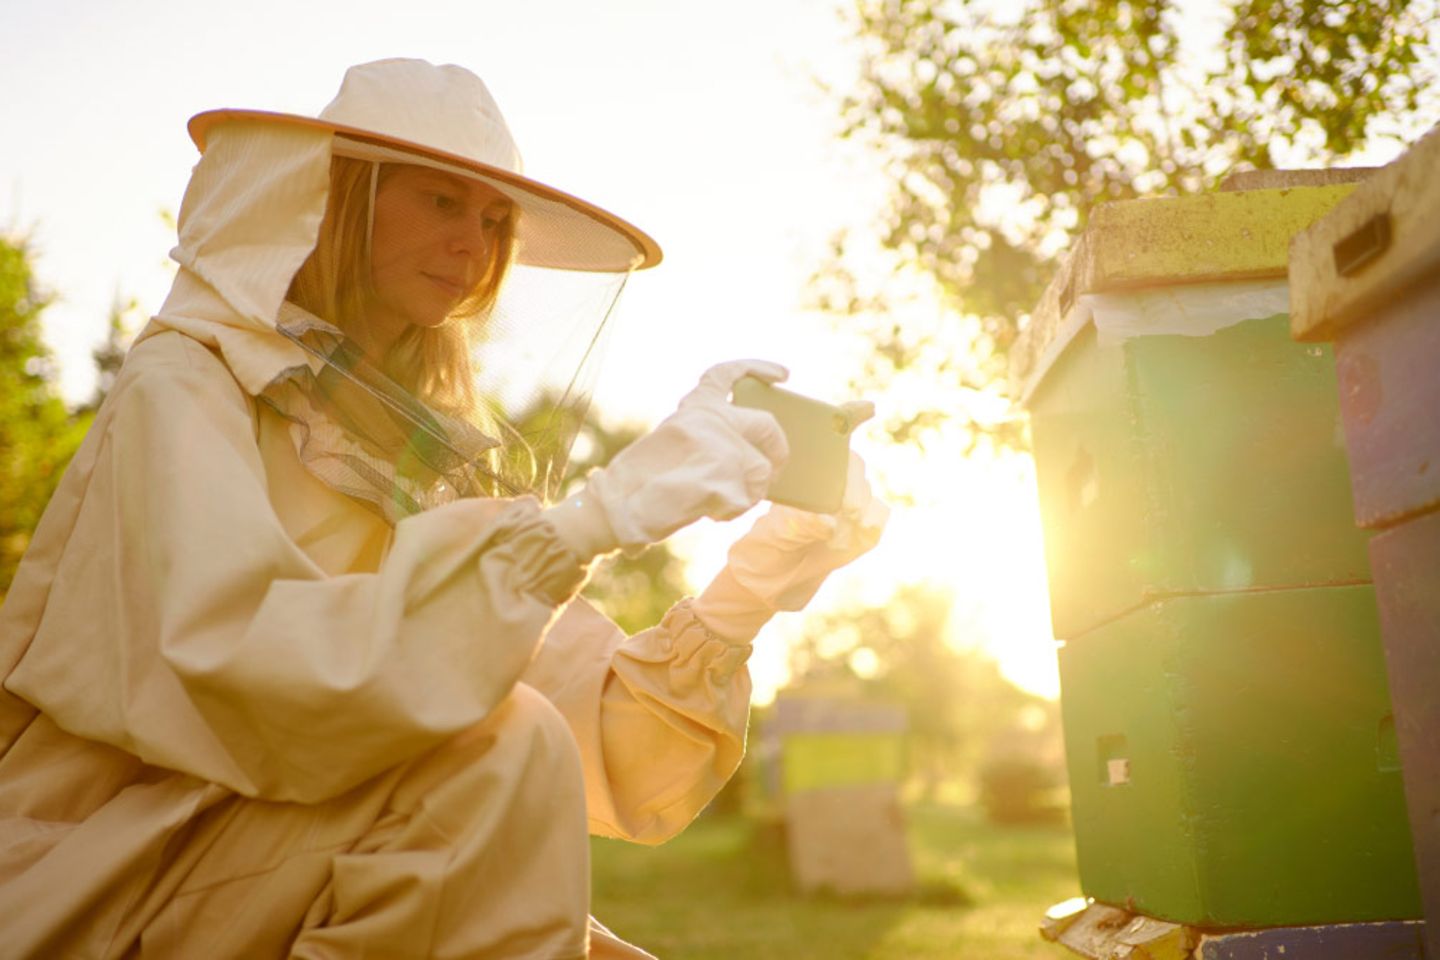 Woman in protective suit films beehive